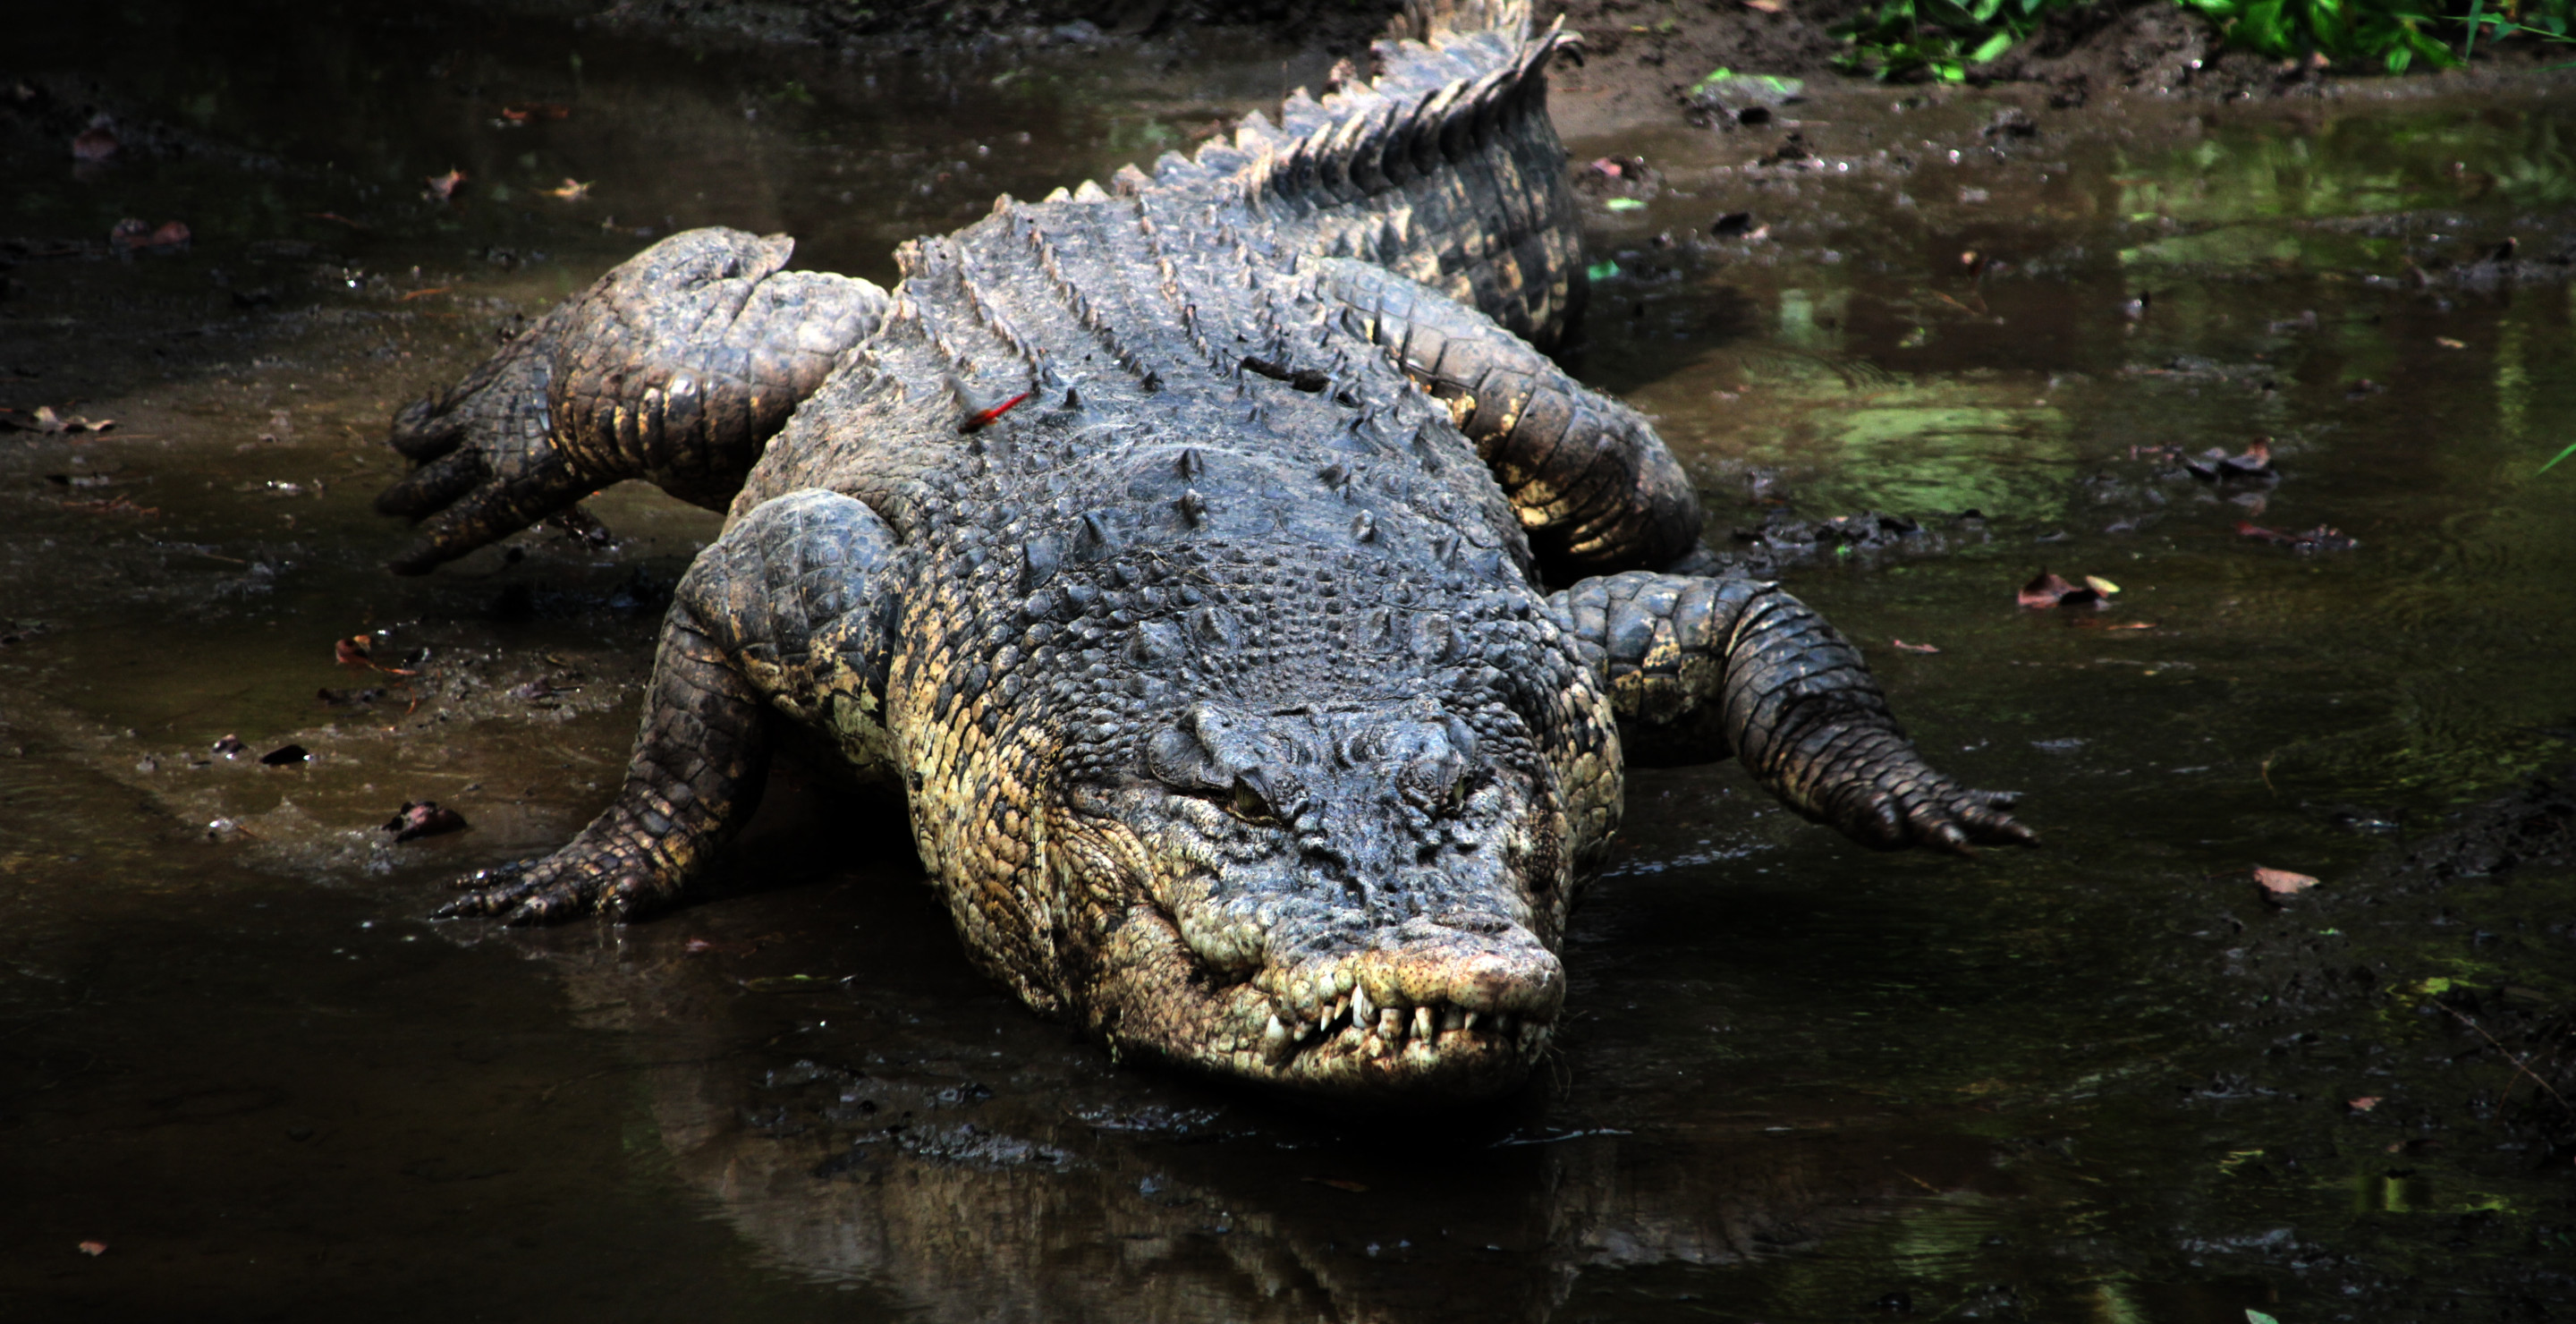 Missing Girl Has Sadly Died Following Crocodile Attack